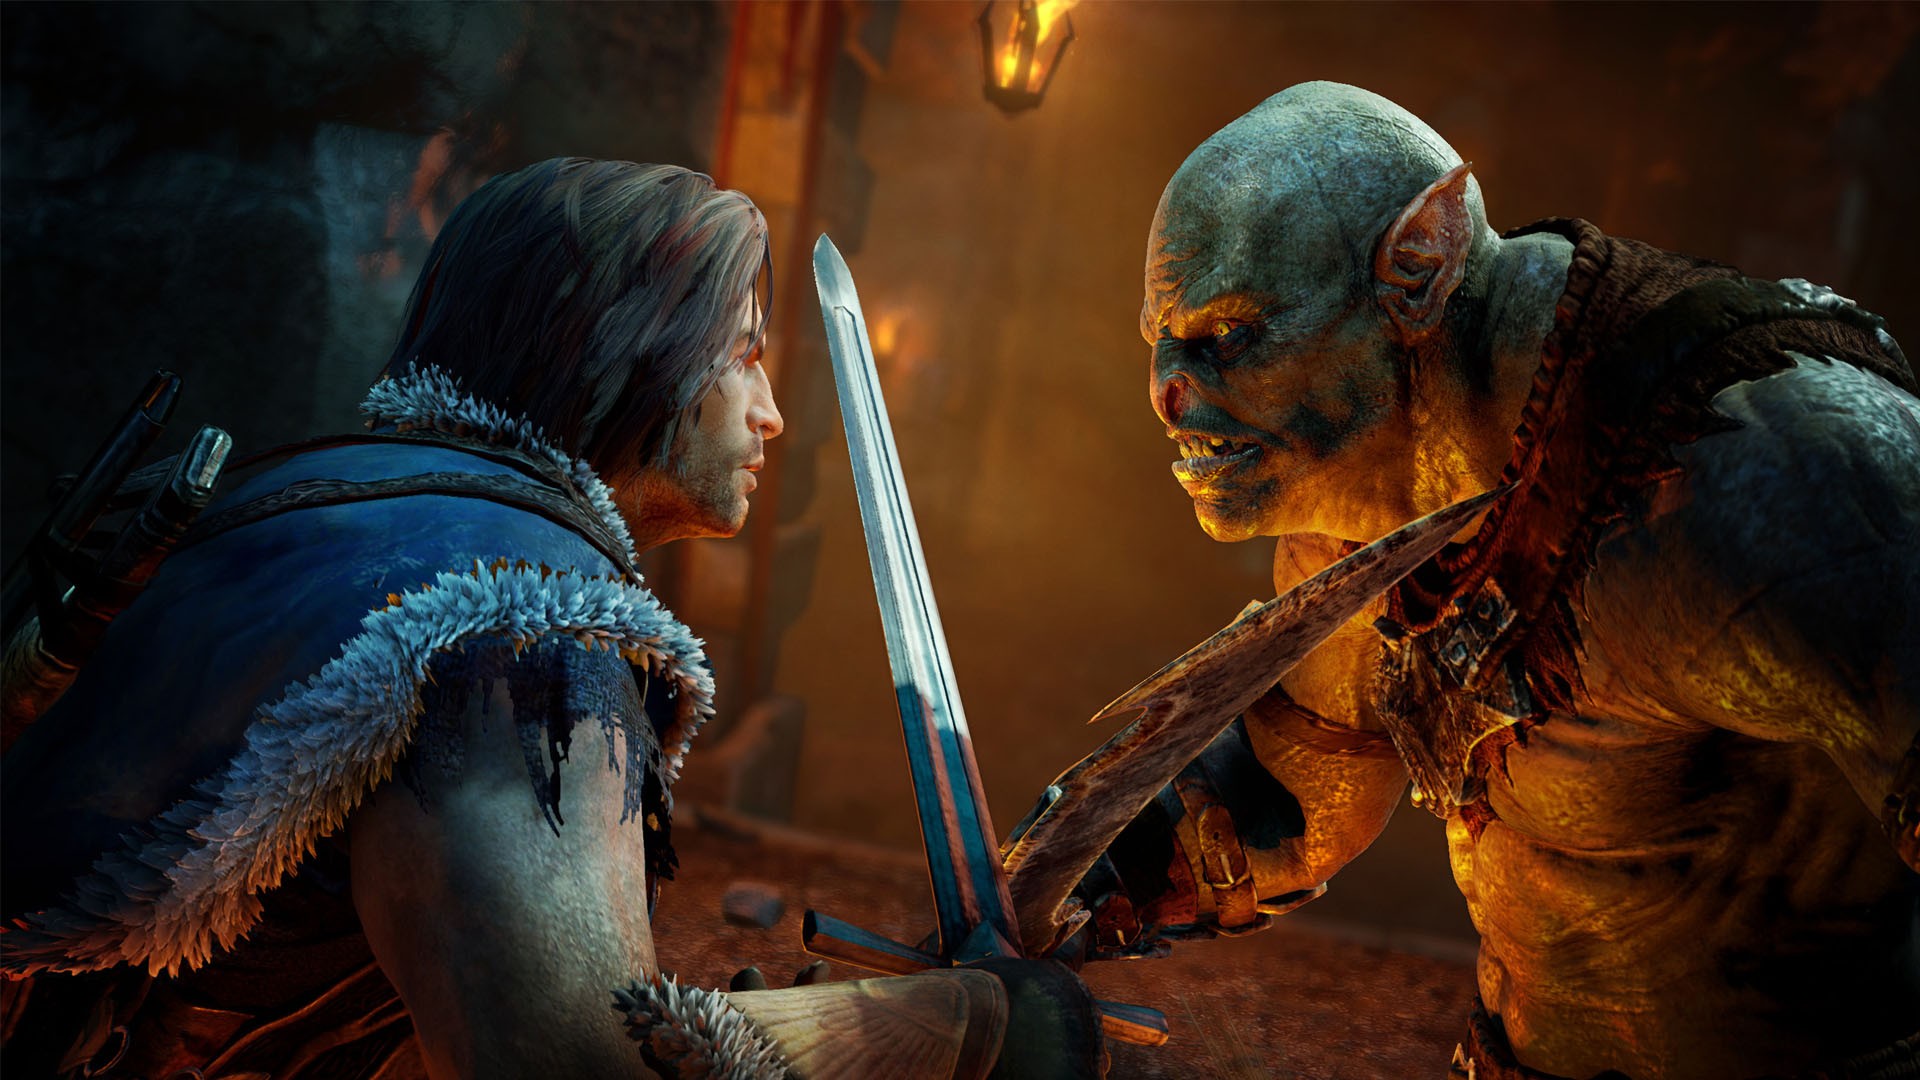 Buy Middle-earth: Shadow of Mordor - Game of the Year Edition Steam